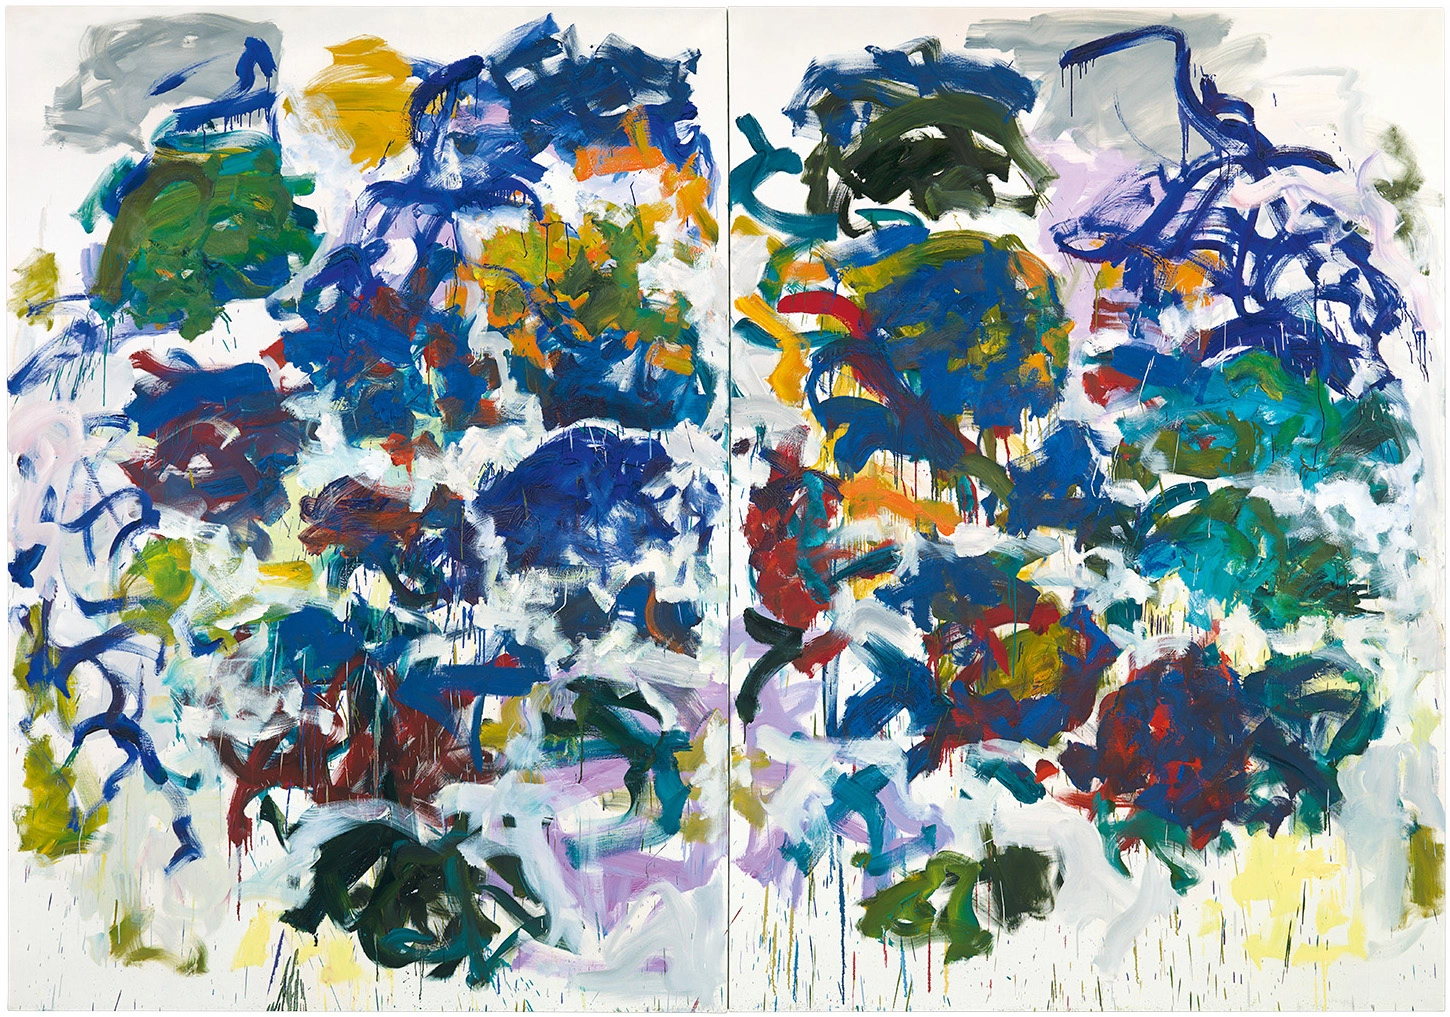 Joan Mitchell, Sunflowers (1990–91). Photo by Brian Buckley; collection of John Cheim; ©estate of Joan Mitchell.